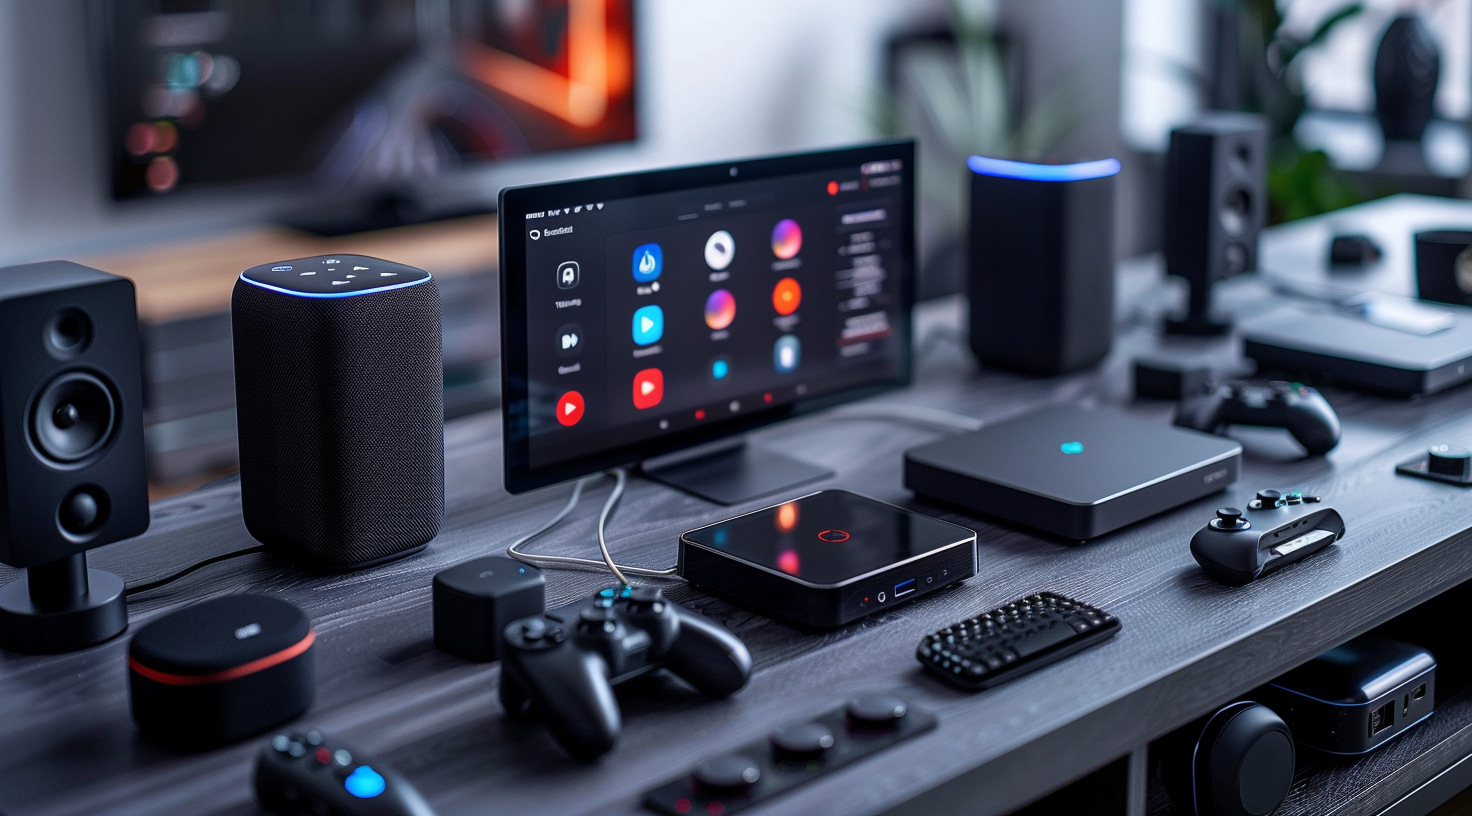 Top 5 Reasons to Invest in a Streaming Device